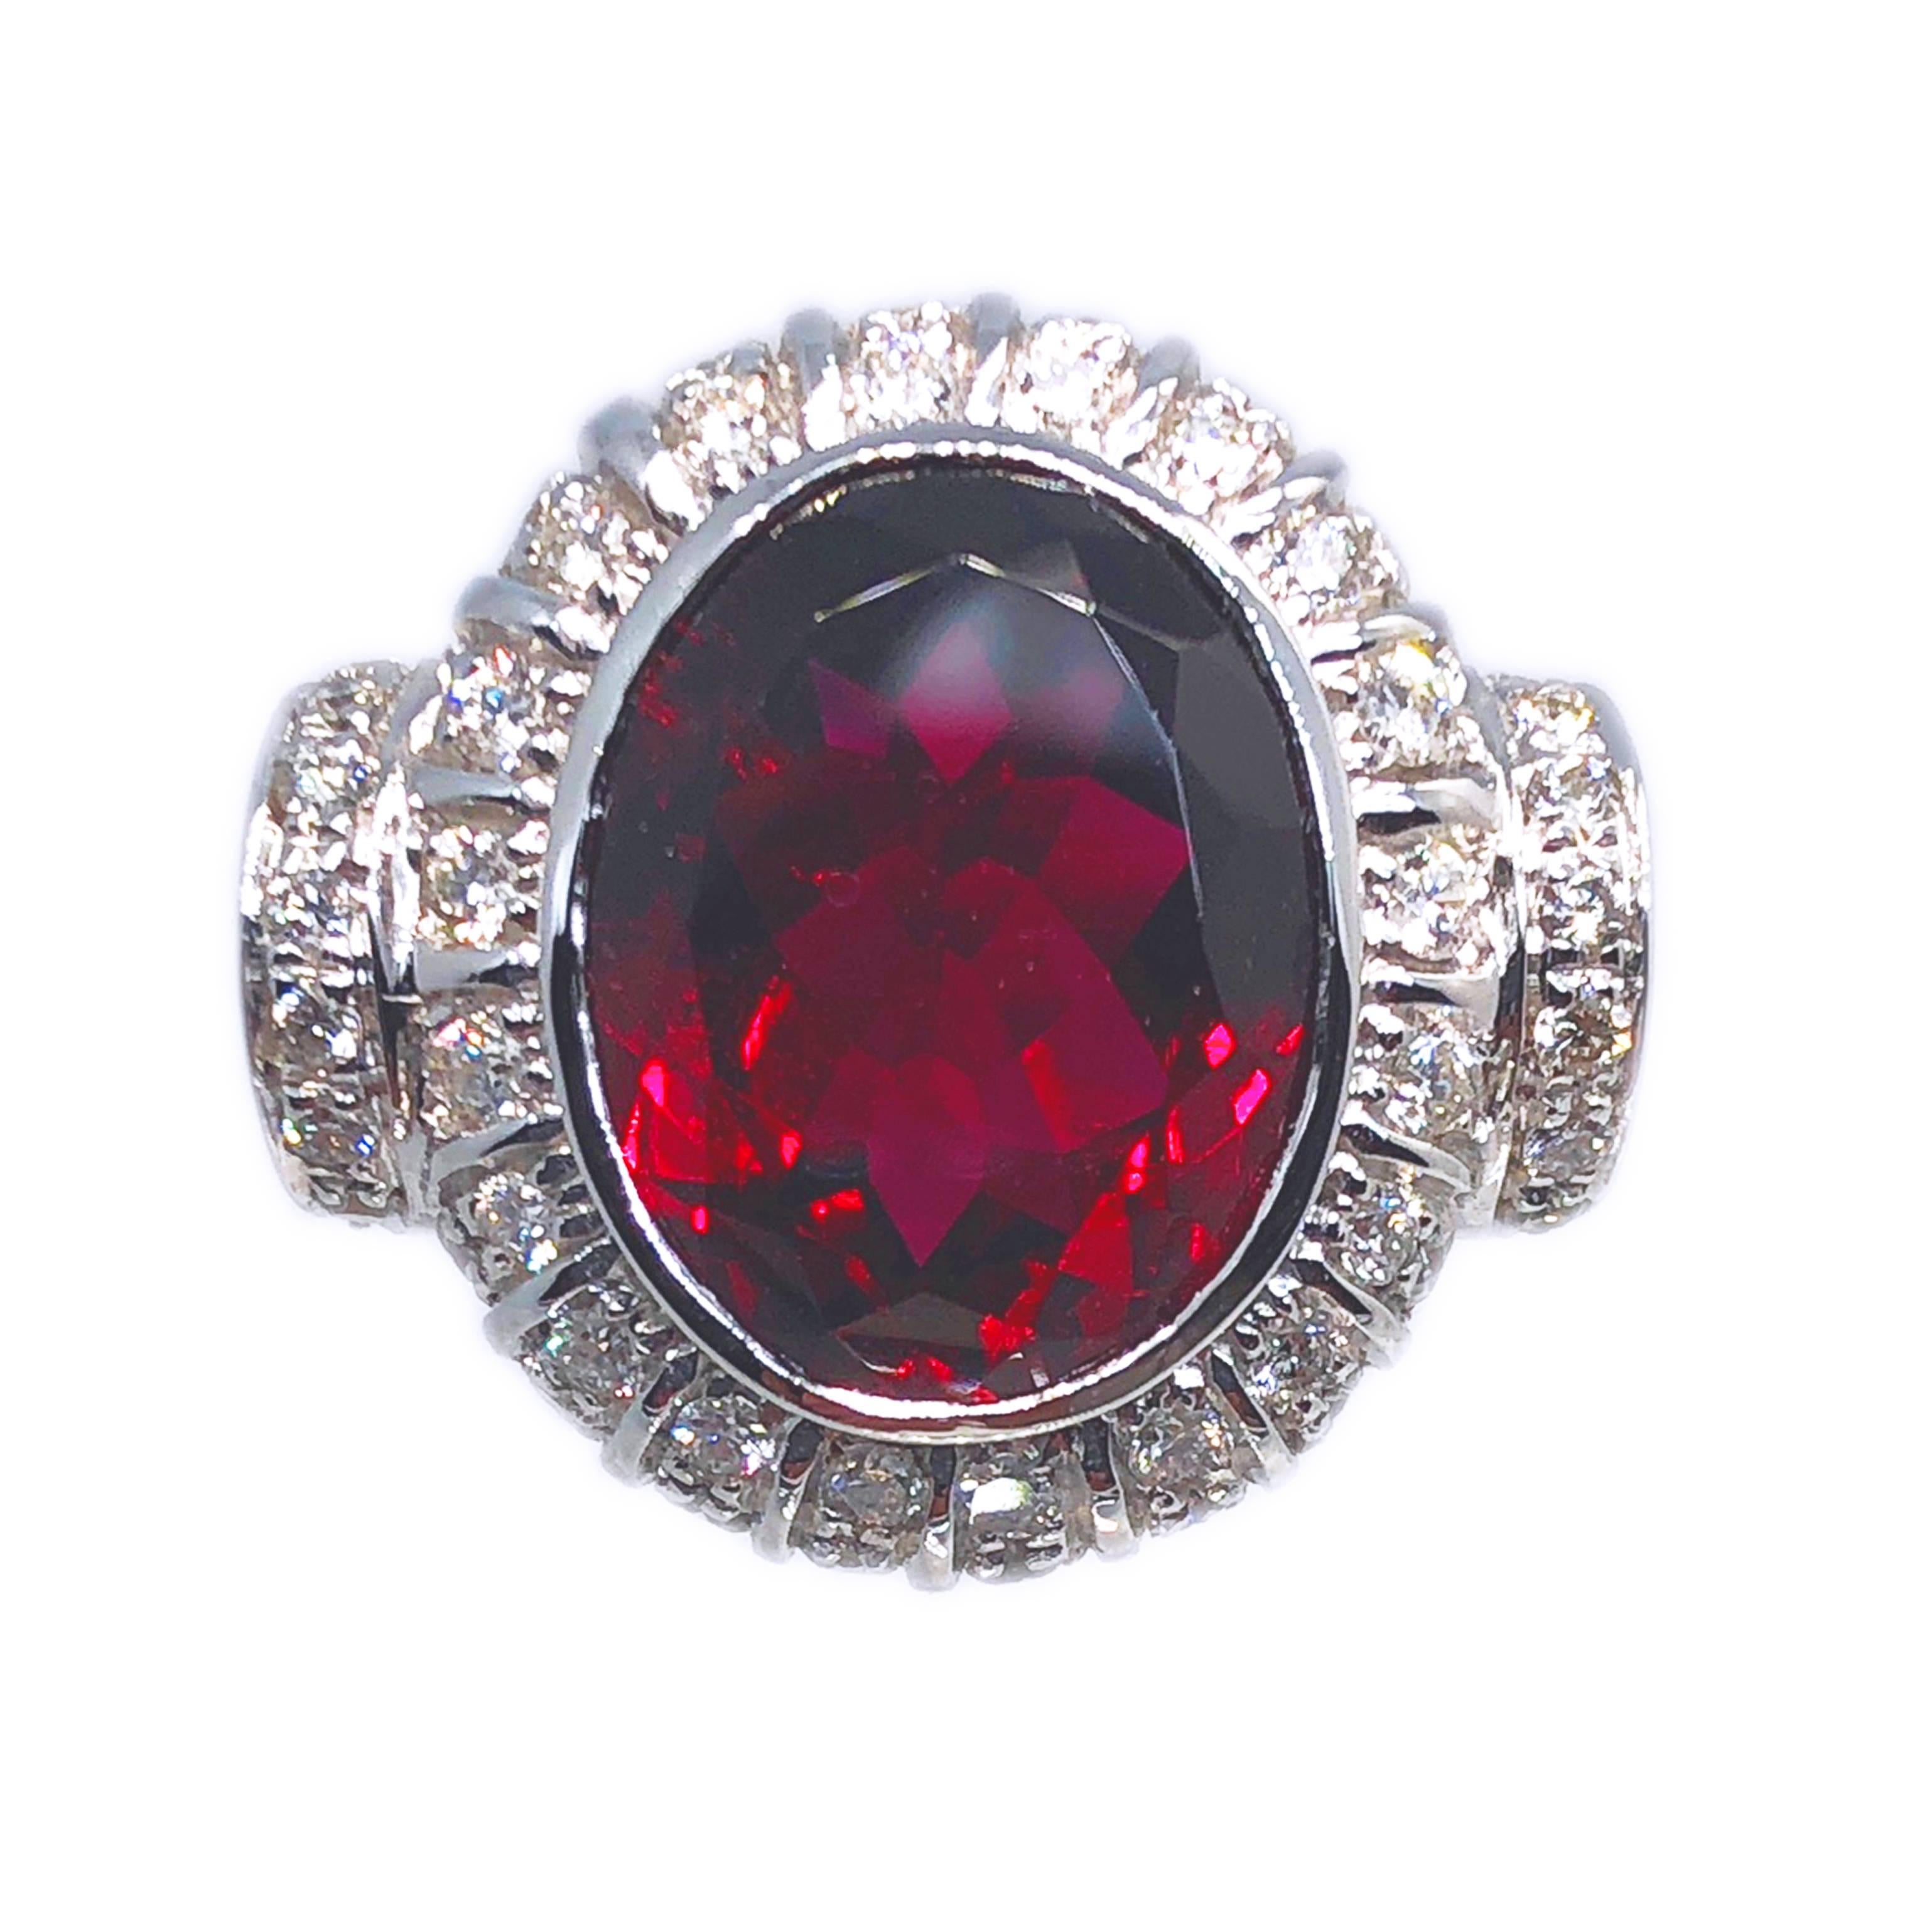 One-of-a-kind, Beautiful 8.81 Kt Natural Oval Cut Red Tourmaline(Rubelite) in a Sumptuos White Diamond, 18 Kt White Gold Setting(1.53 kt, F-G, VVs1).
Us size 6 1/2
French size 54

We offer complimentary resizing on this piece